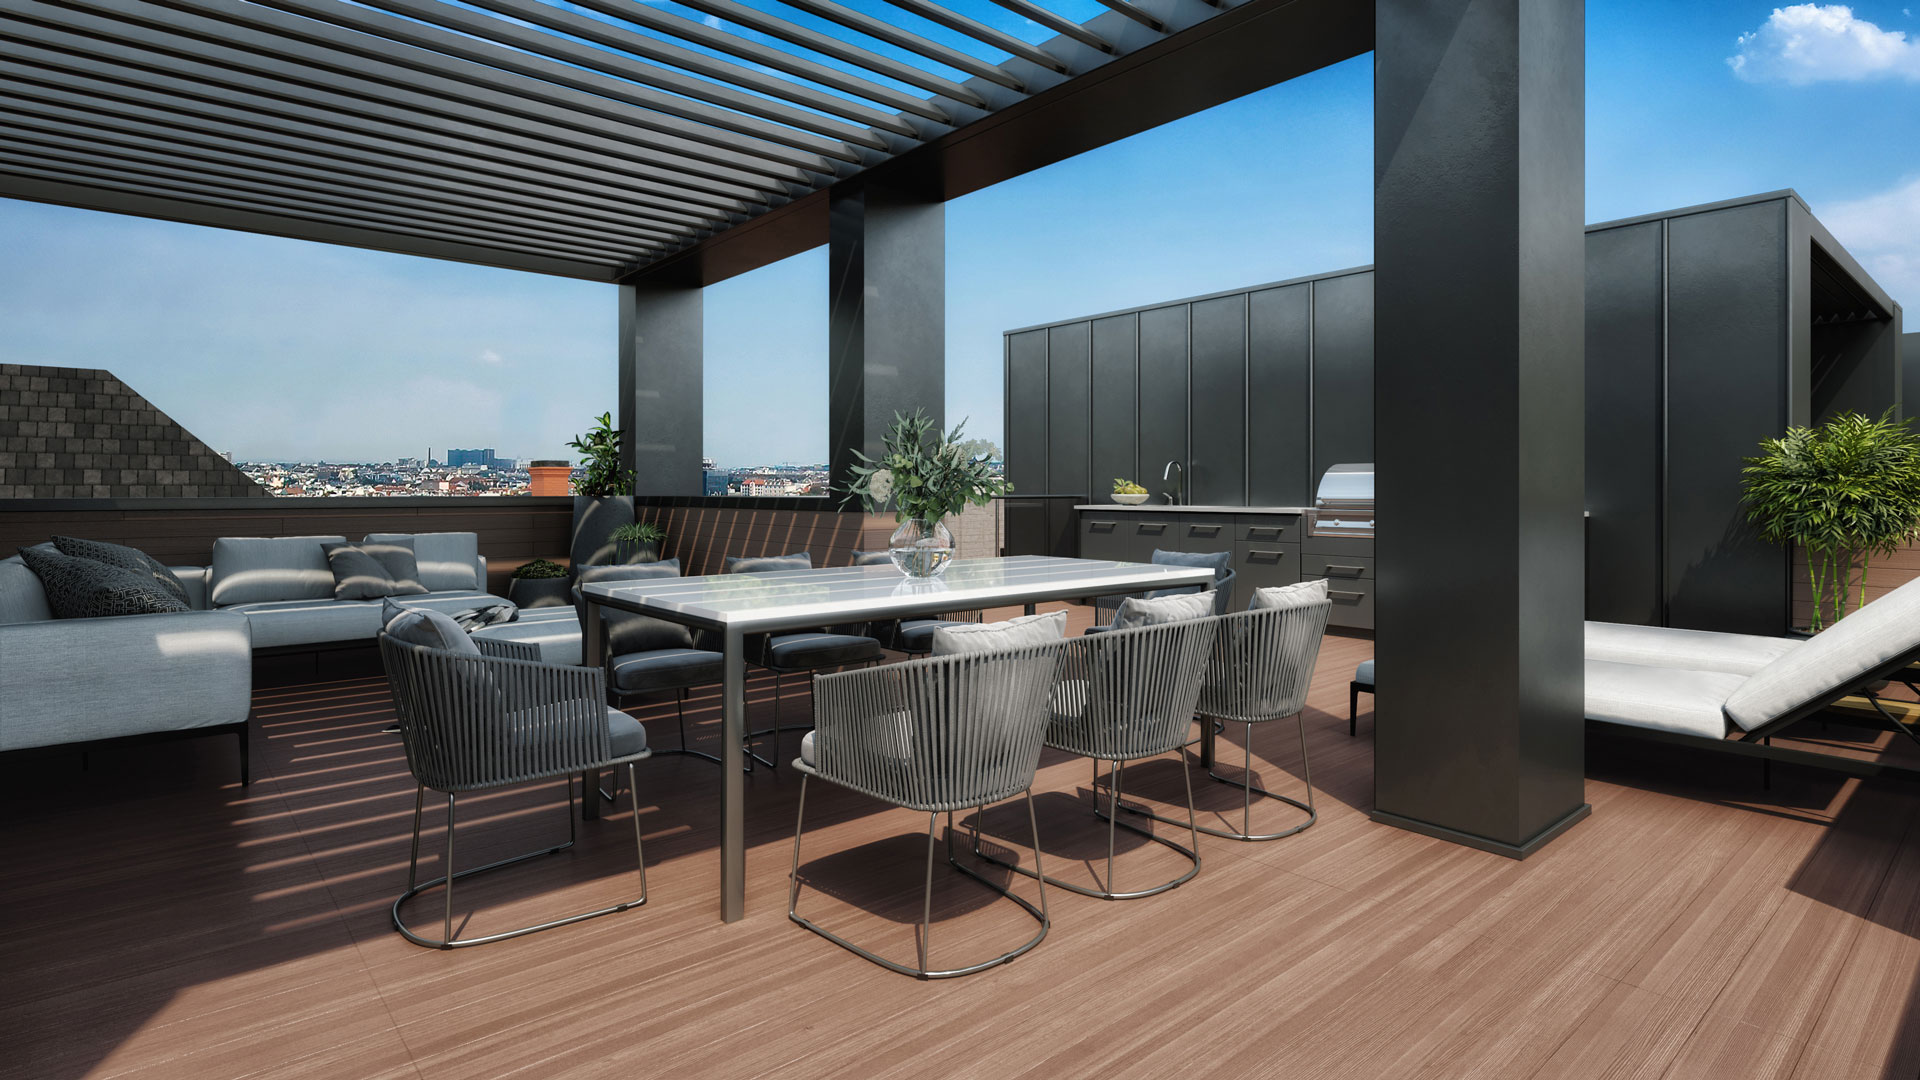 3D Rooftop Terrace Visualization for a Quebec Real Estate Project